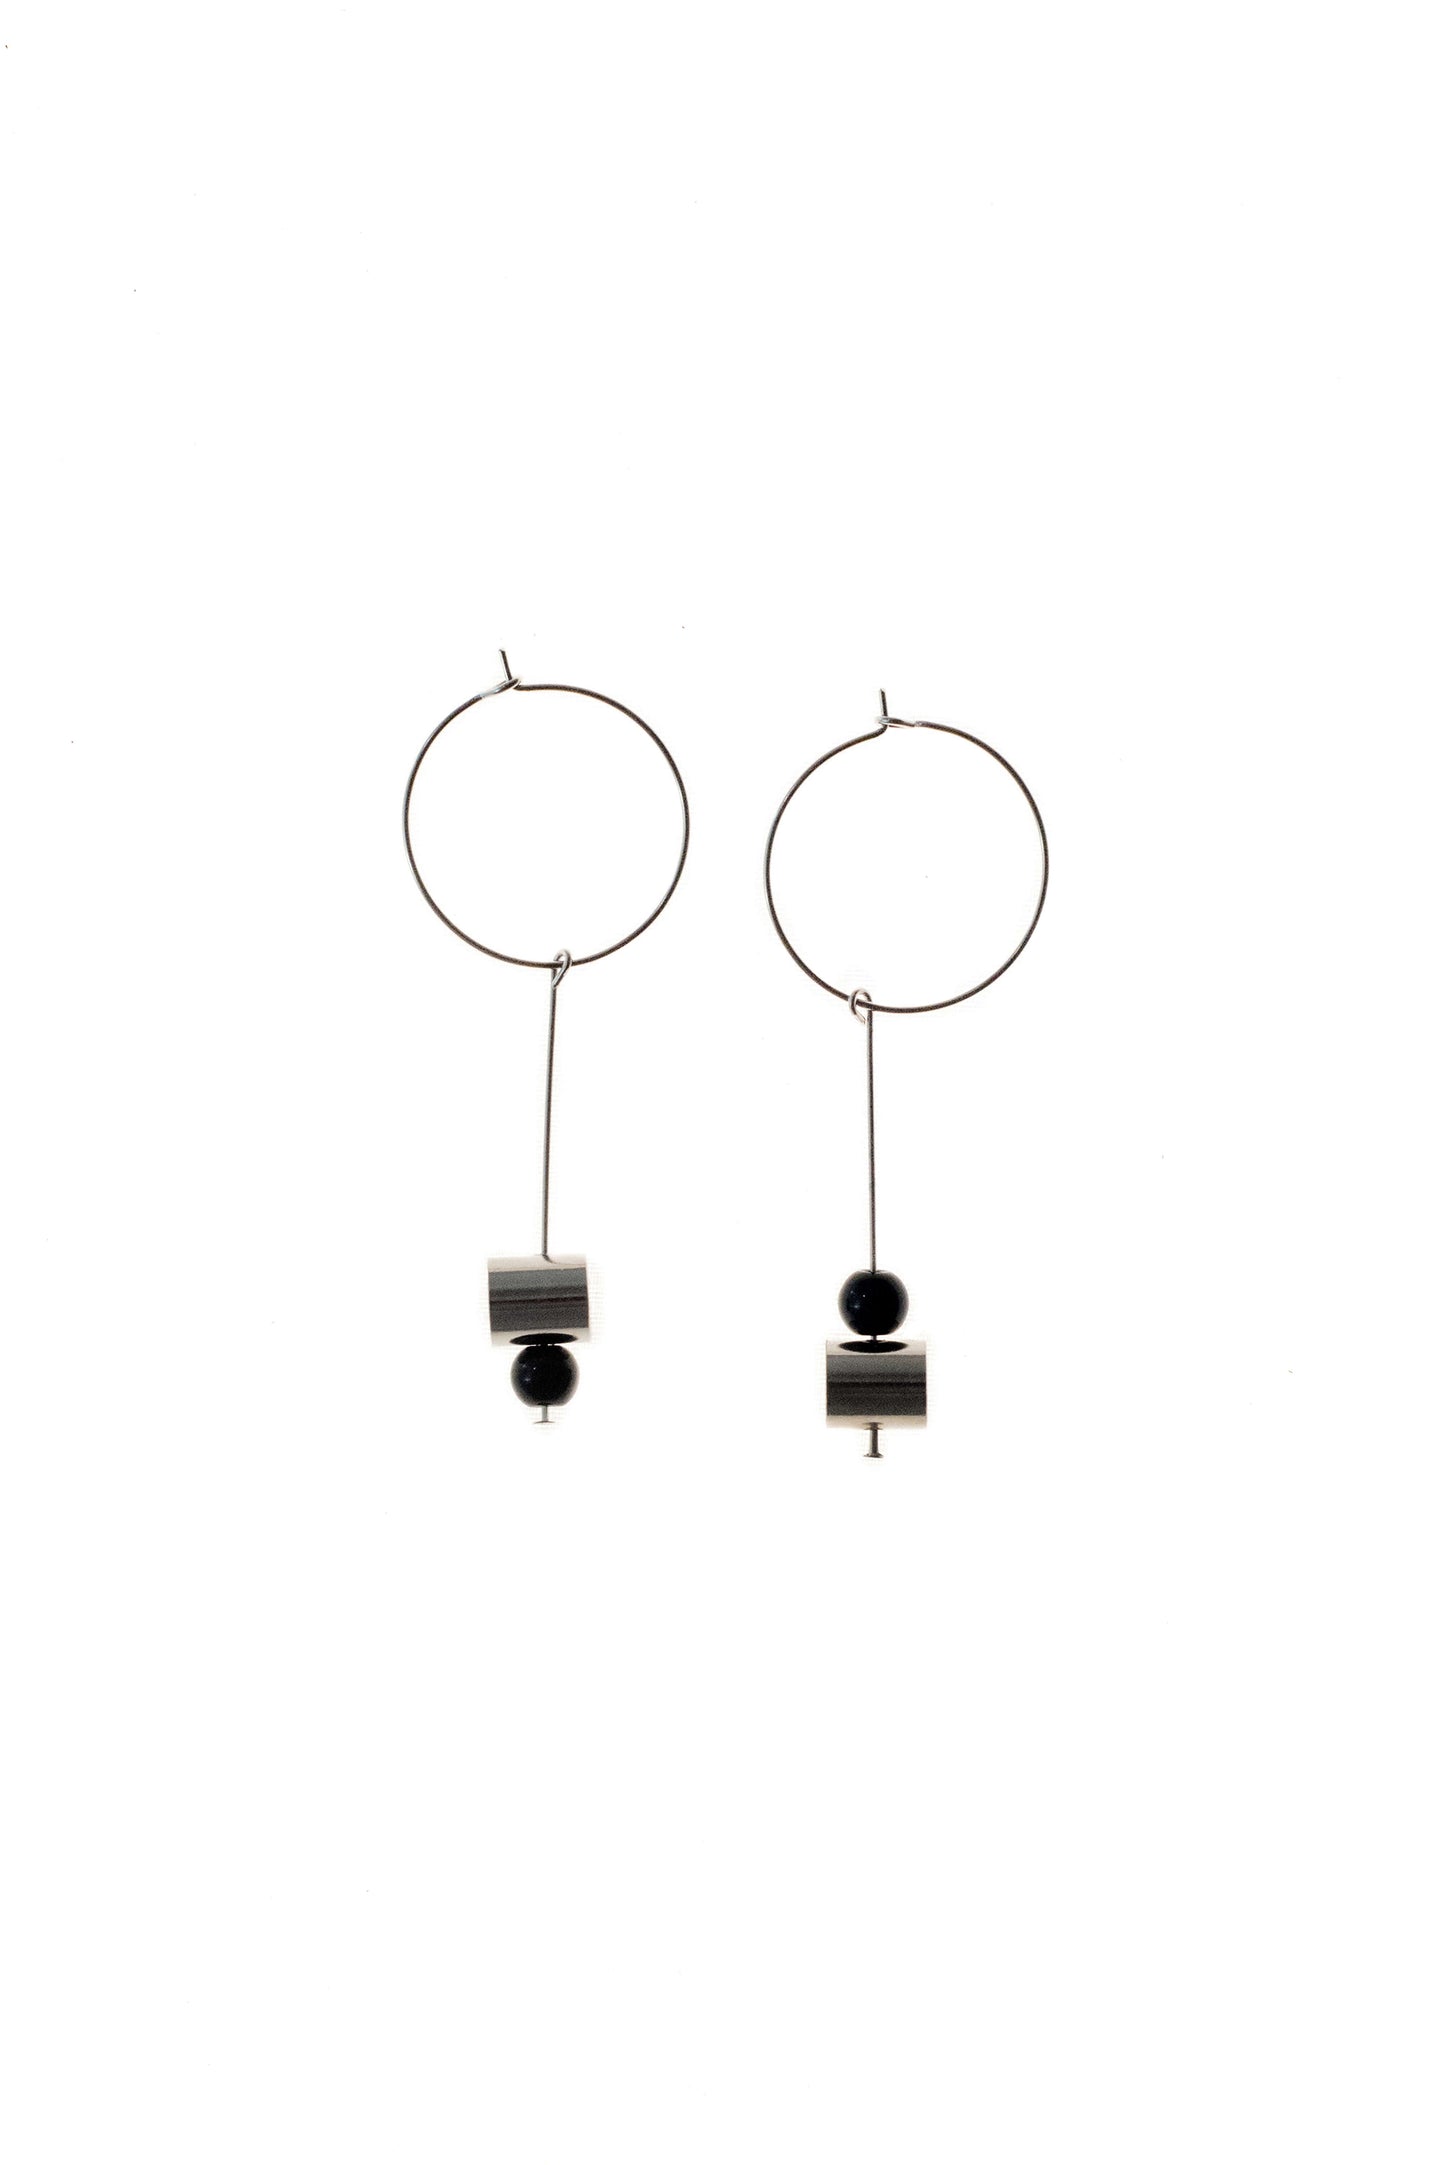 This pair of earring is made of a hoop earring which features galvanized brass and detachable pendant made of brass galvanized in silver and onyx.